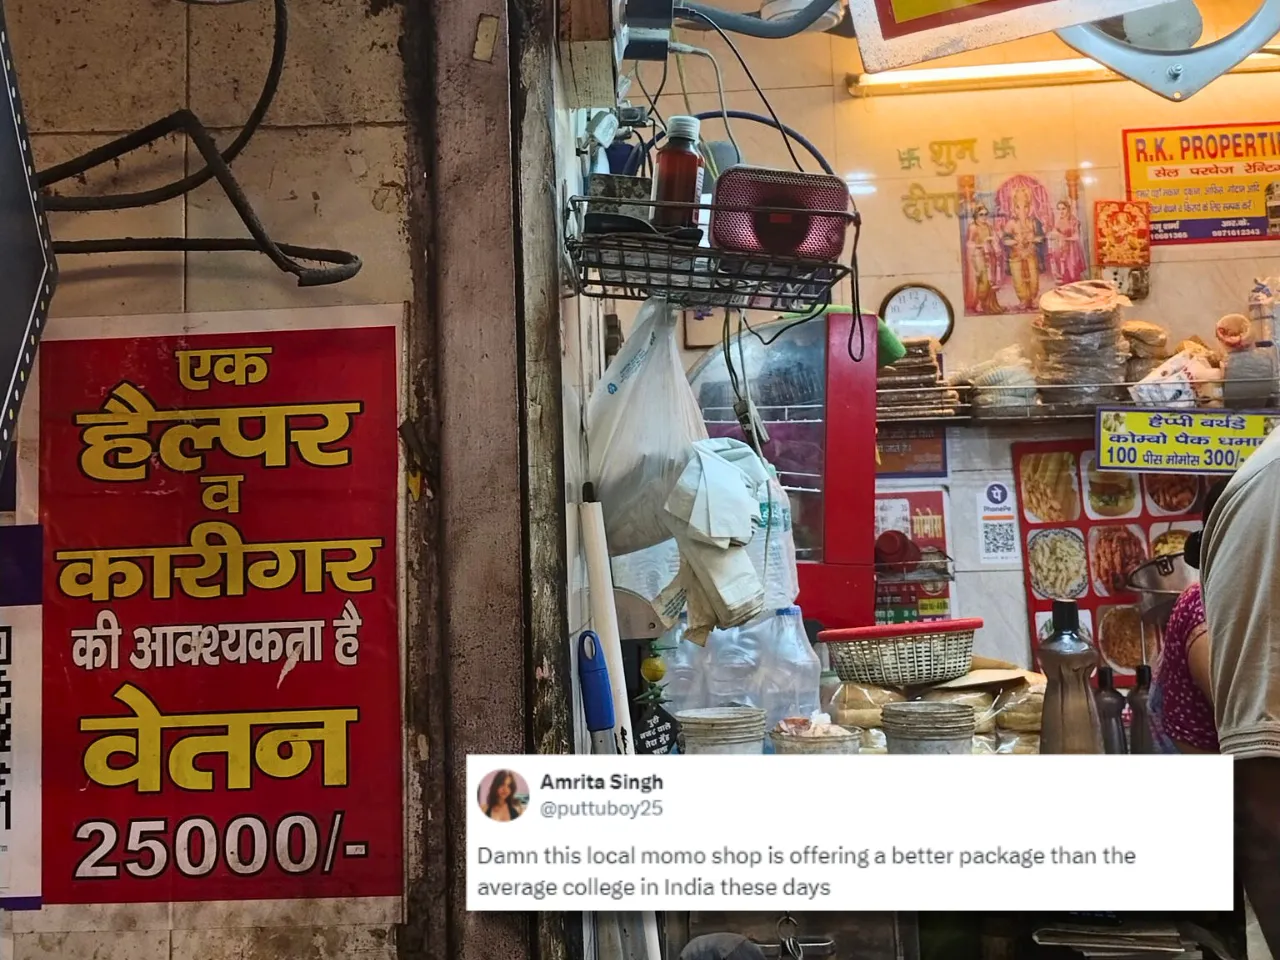 Momo shop offers Rs 25,000 salary for helper, Netizens says 'Applying right now'